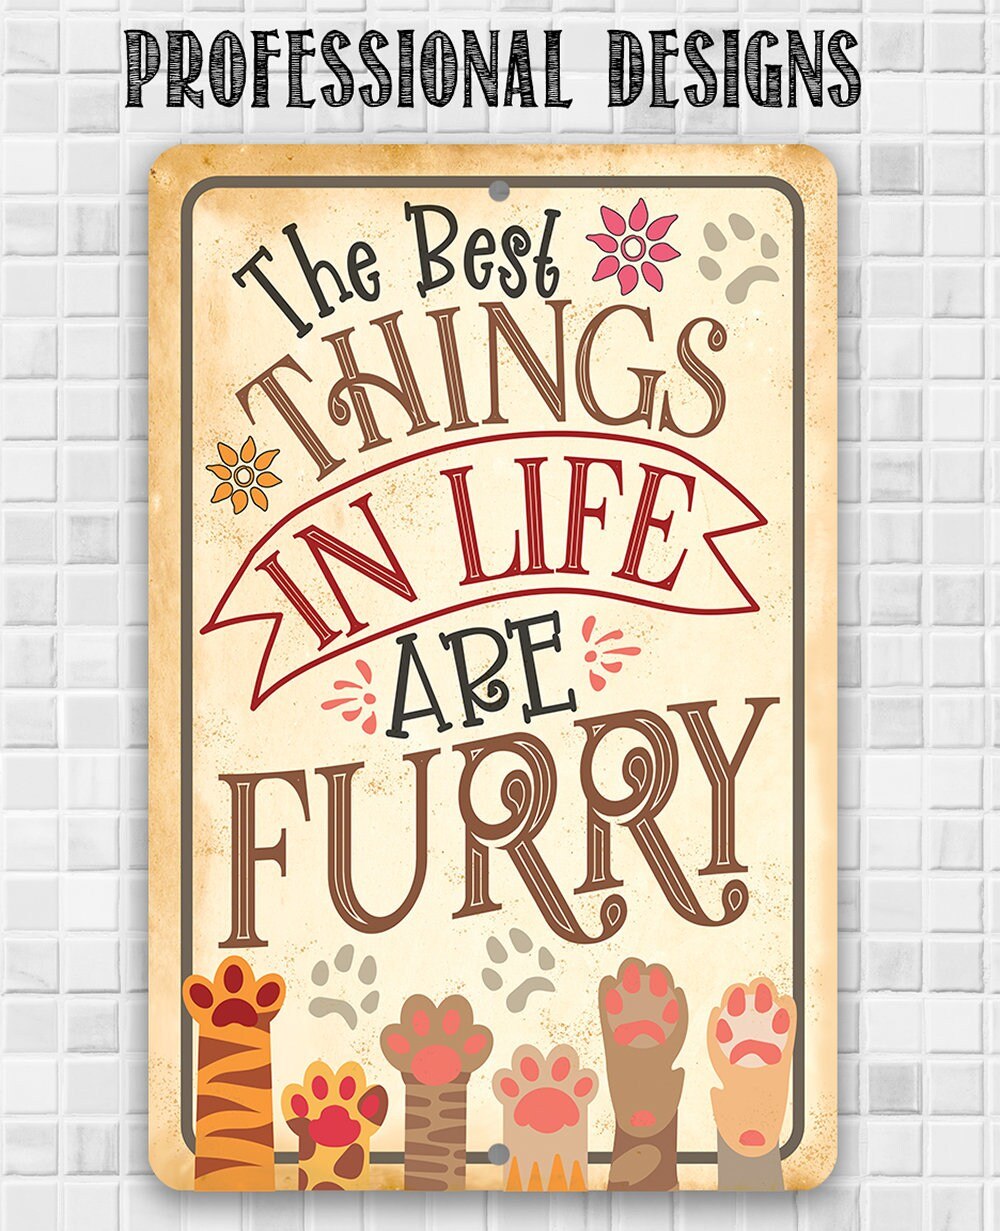 The Best Things In Life Are Furry 8" x 12" or 12" x 18" Aluminum Tin Awesome Metal Poster Lone Star Art 